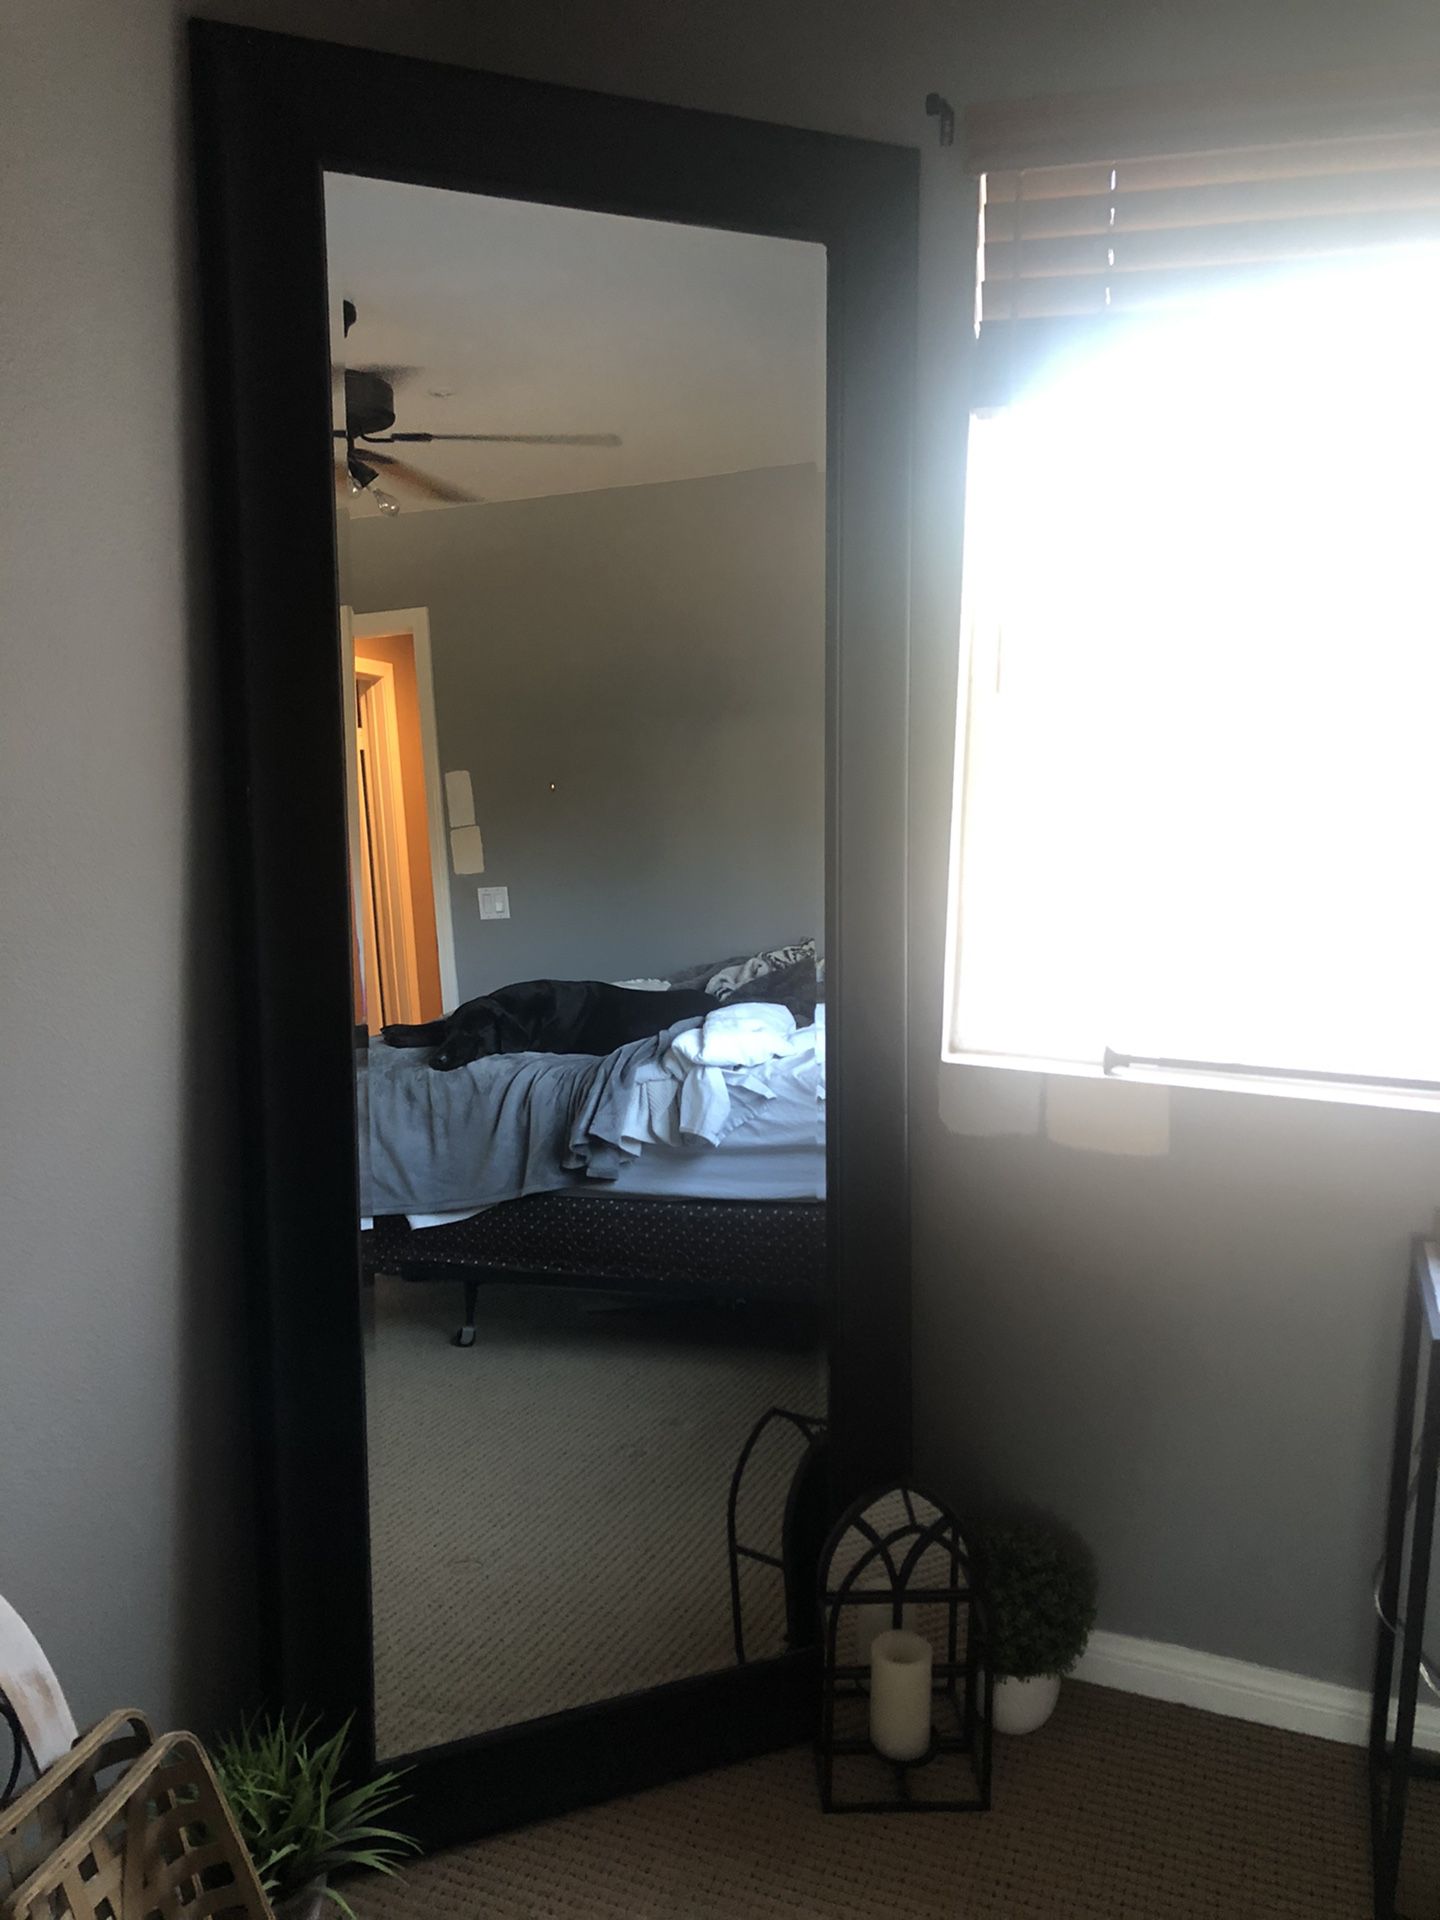 Large wall/standing mirror